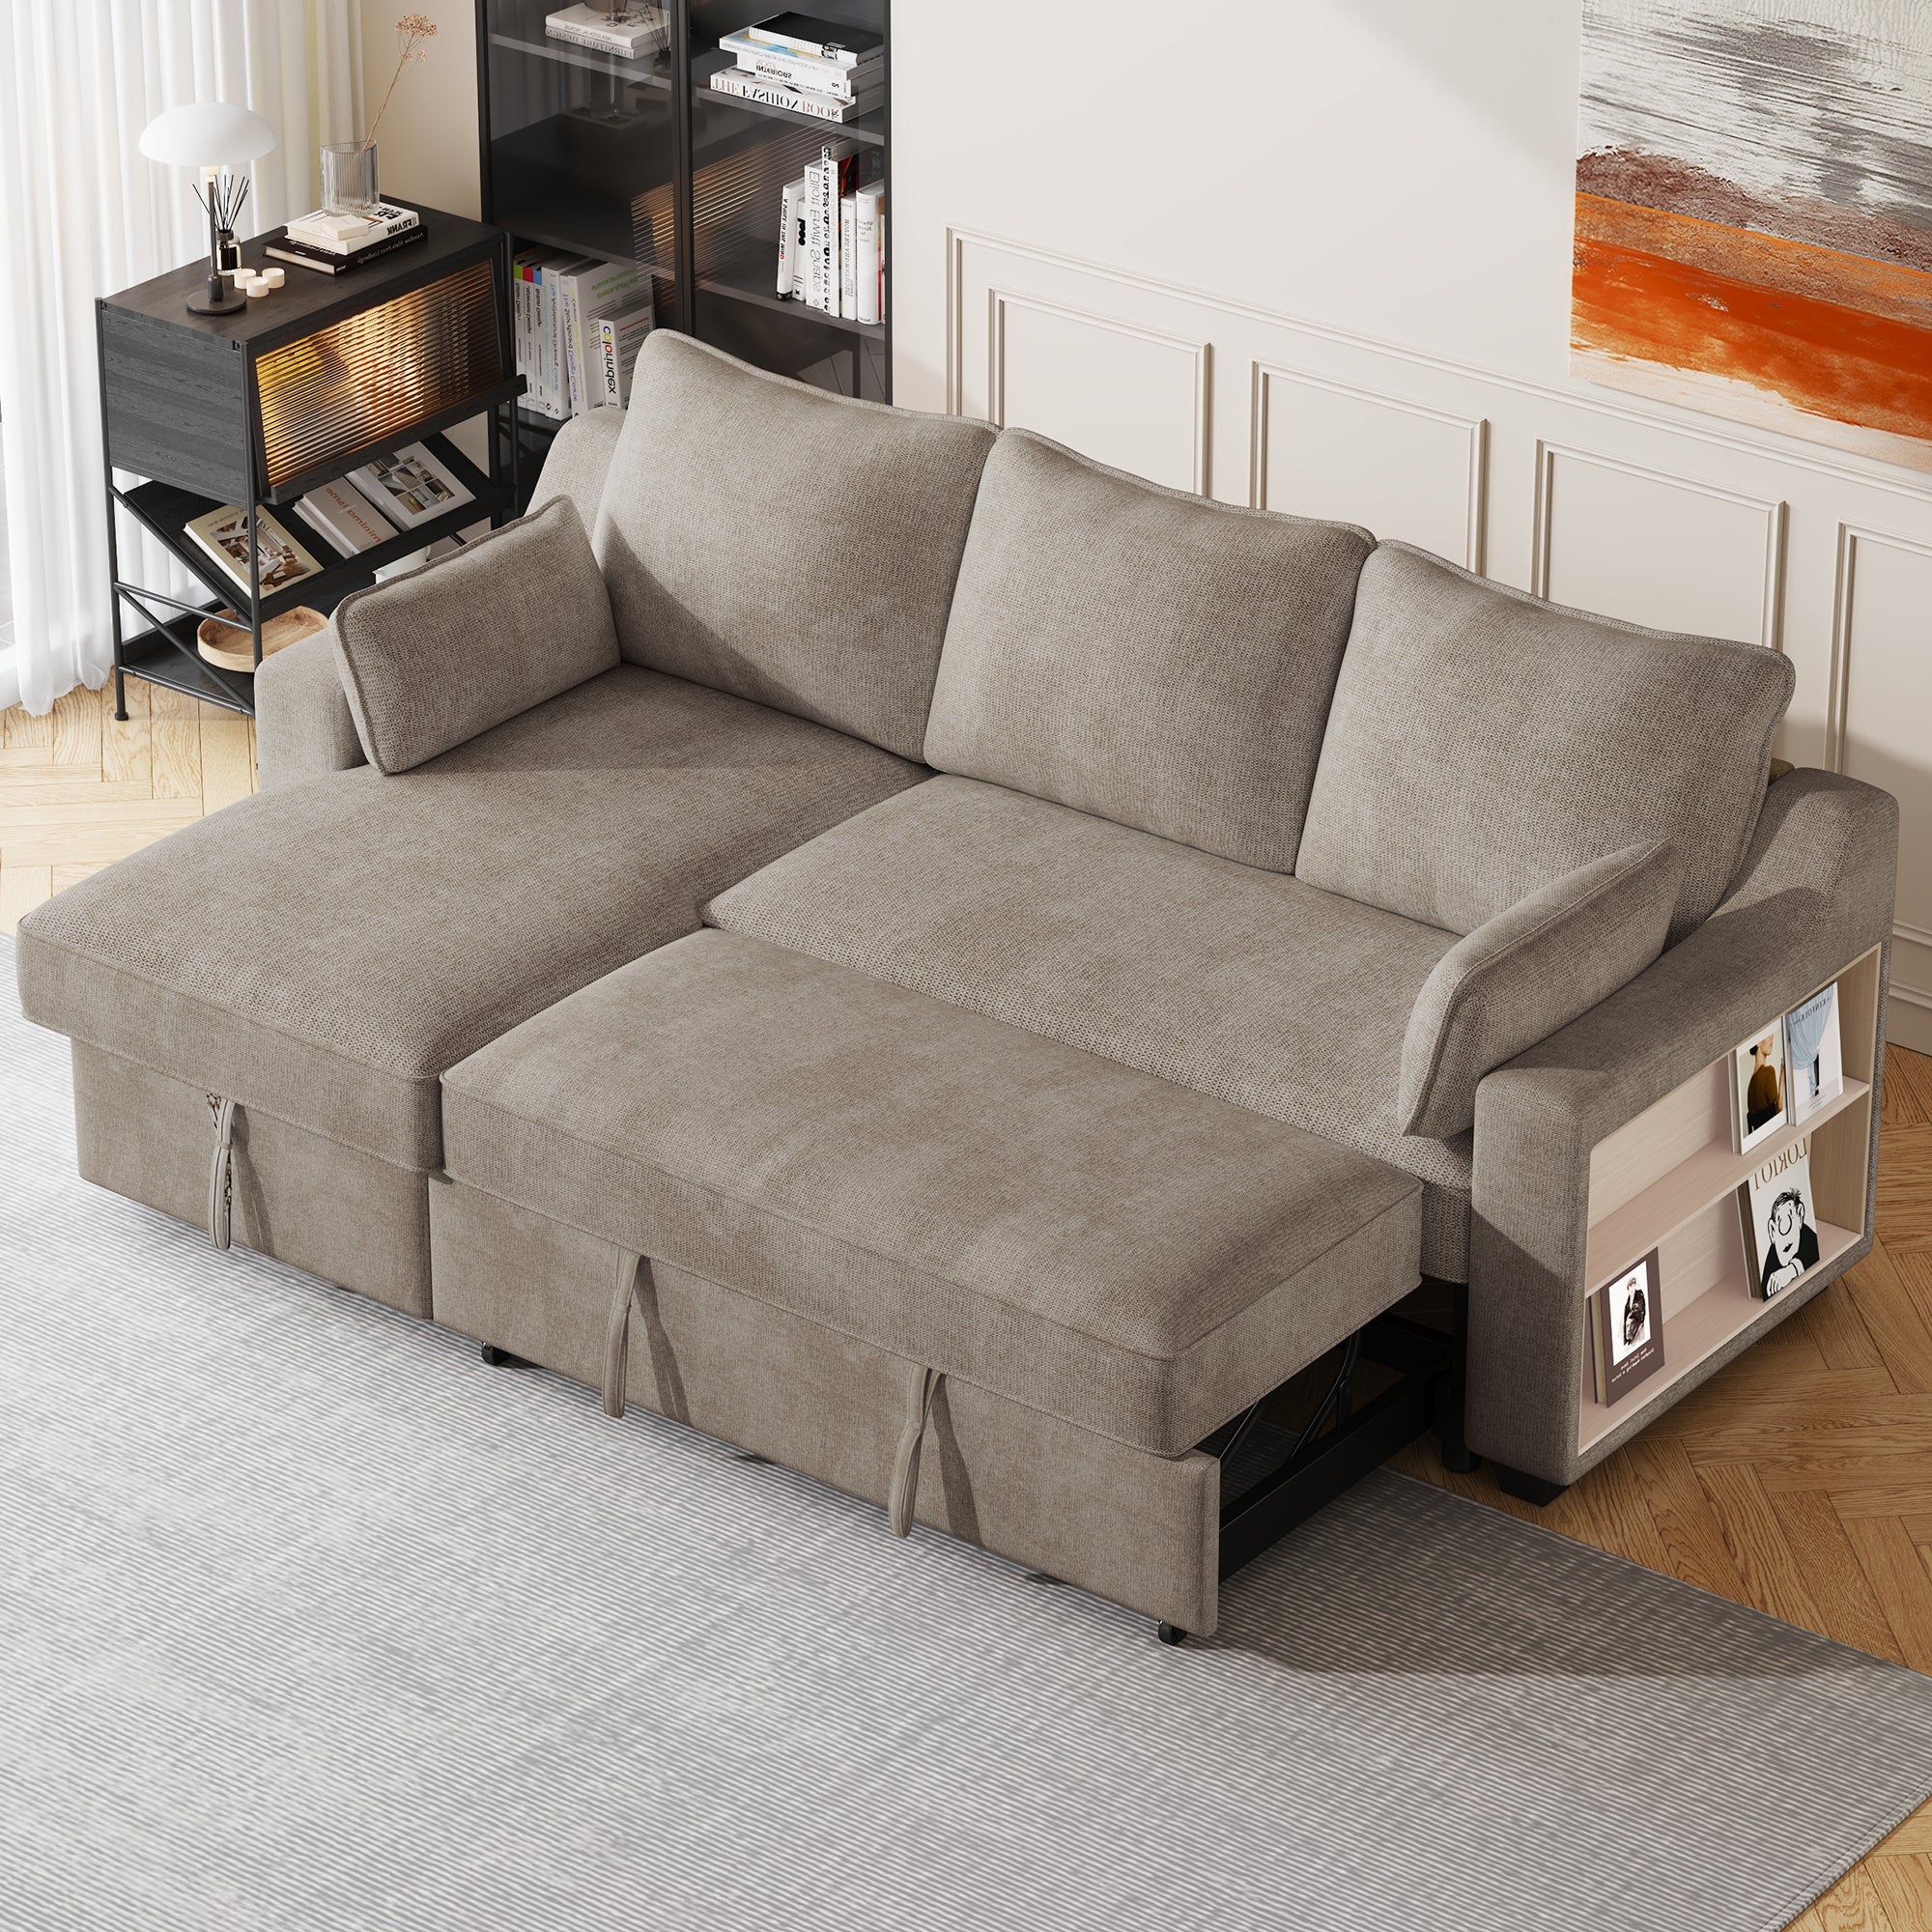 90" L-Shaped Sleeper Sofa w/ Storage Chaise, Racks & USB - Light Brown-Sleeper Sectionals-American Furniture Outlet